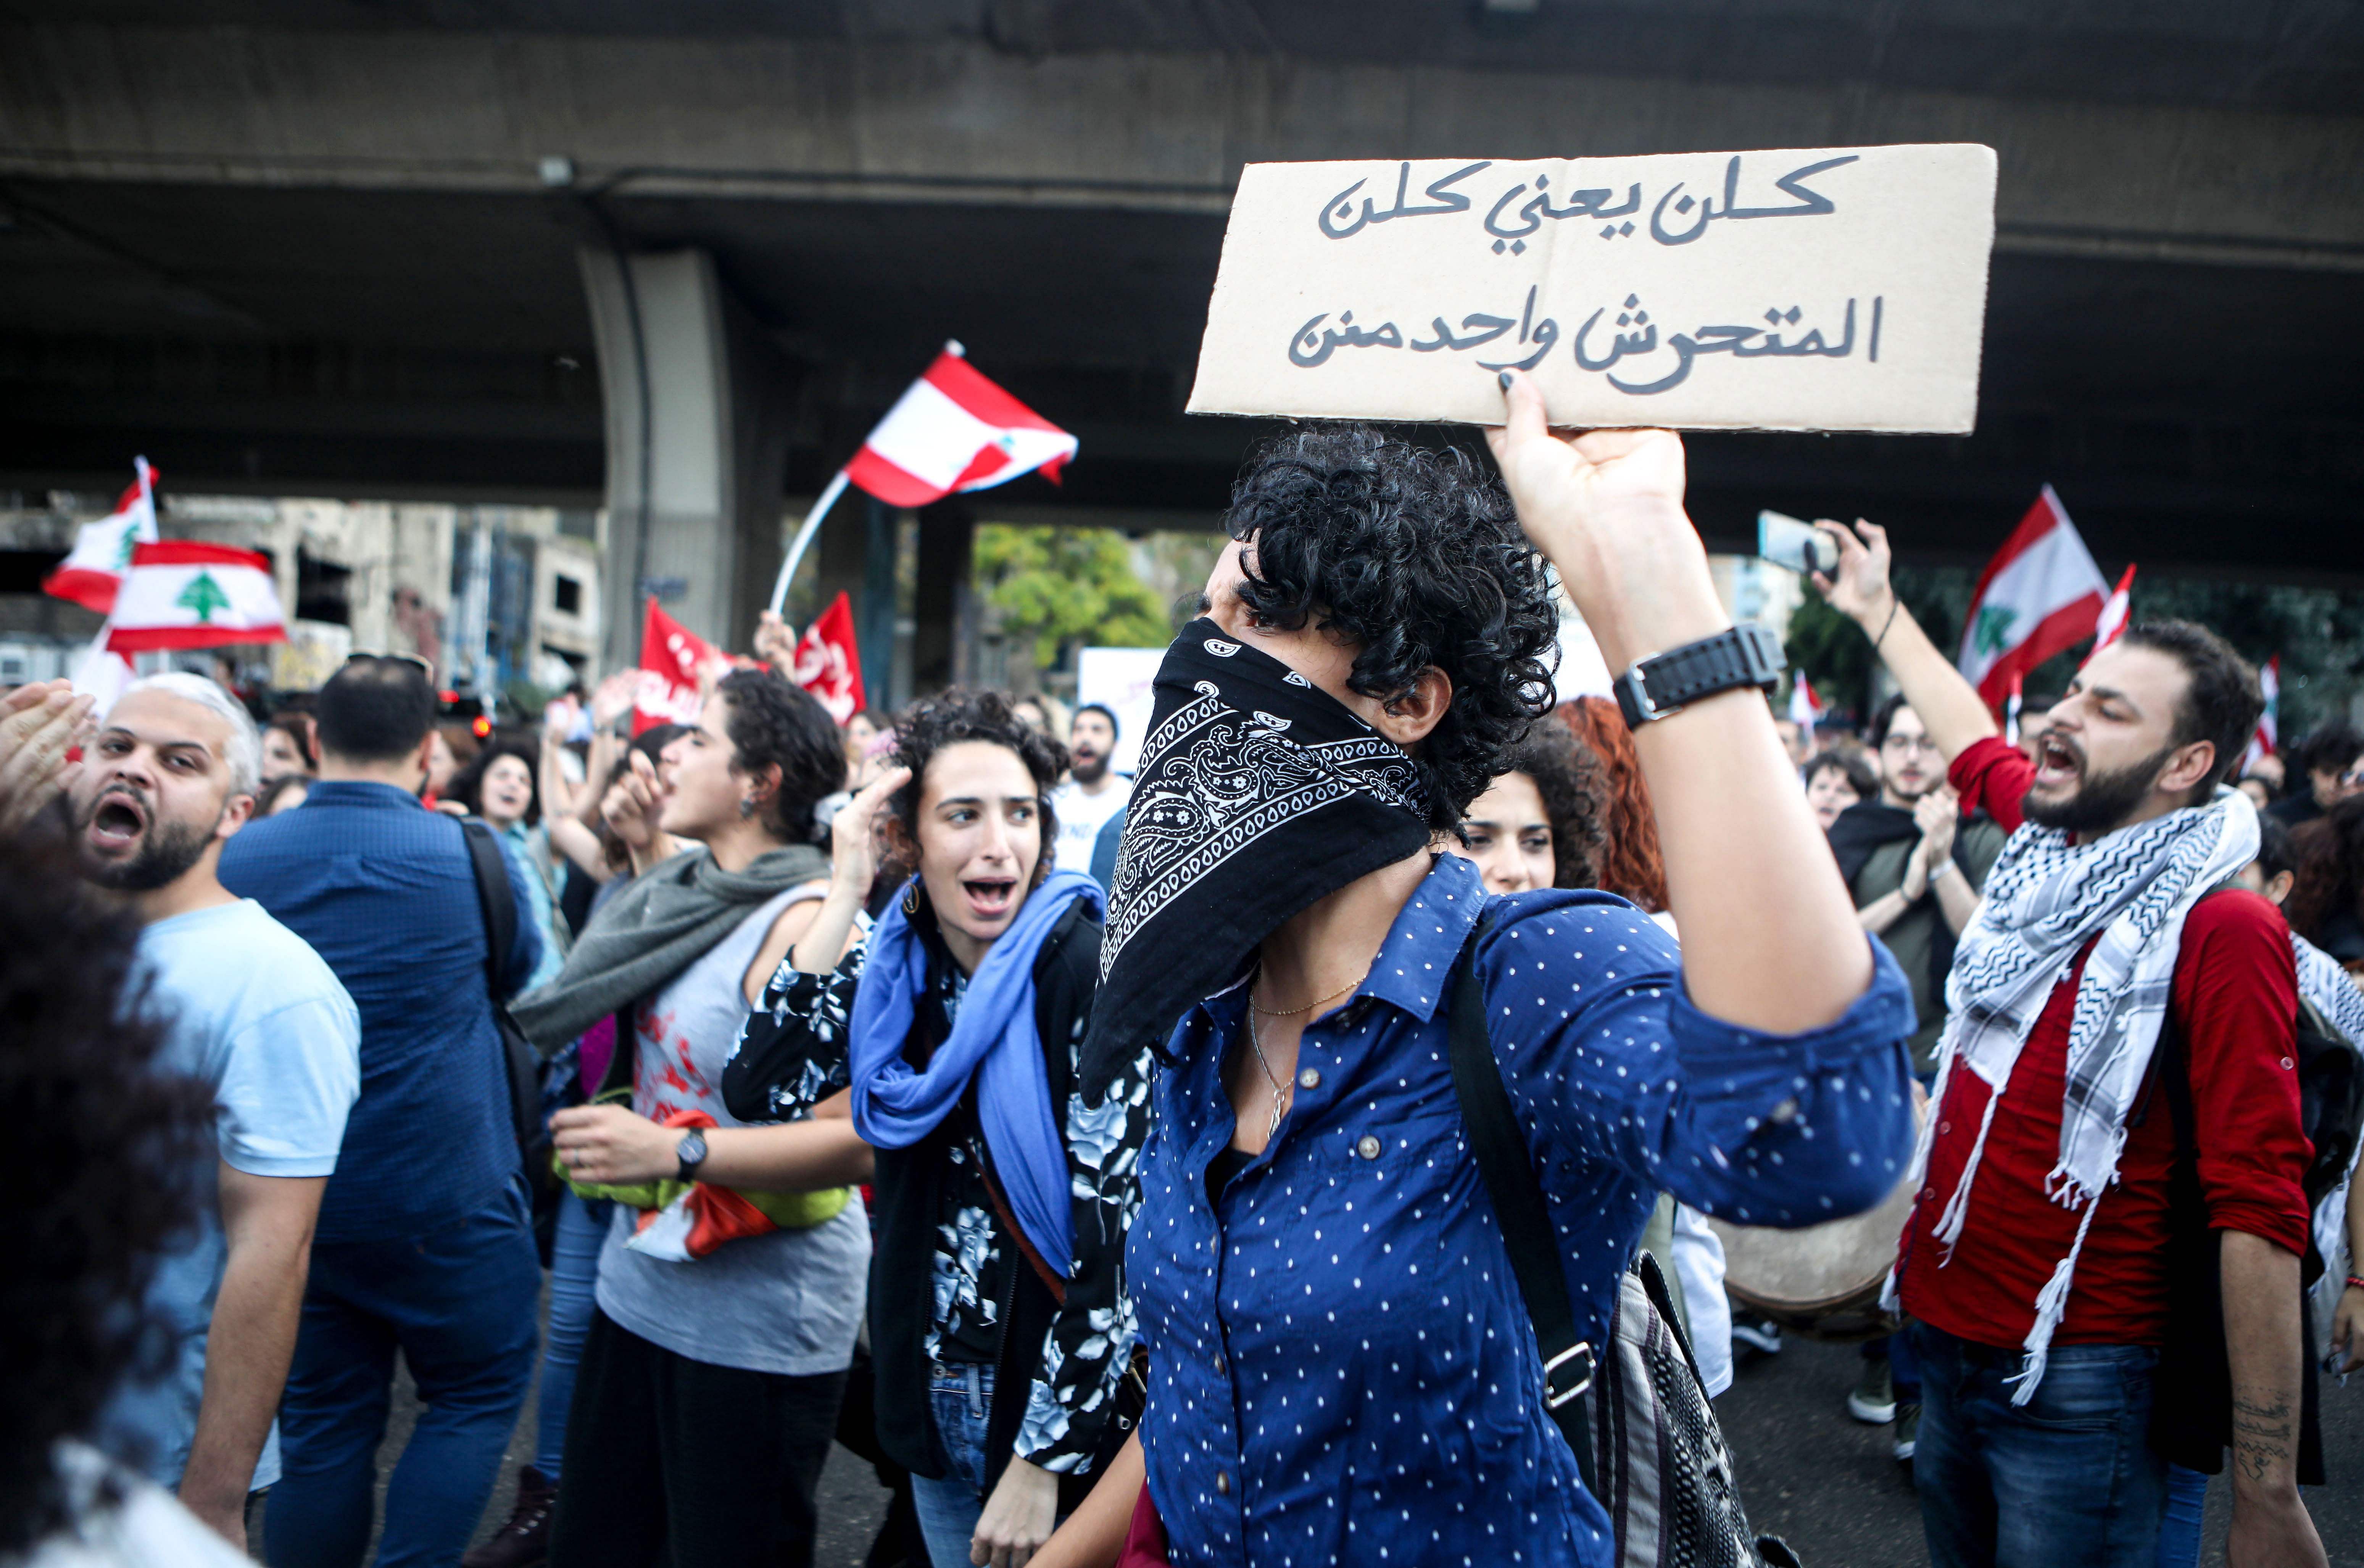 A Lebanese anti-government protester holds up a sign reading "all means all, including harassers", during a demonstration march on the former demarcation line separating Beirut. (AFP Photo)